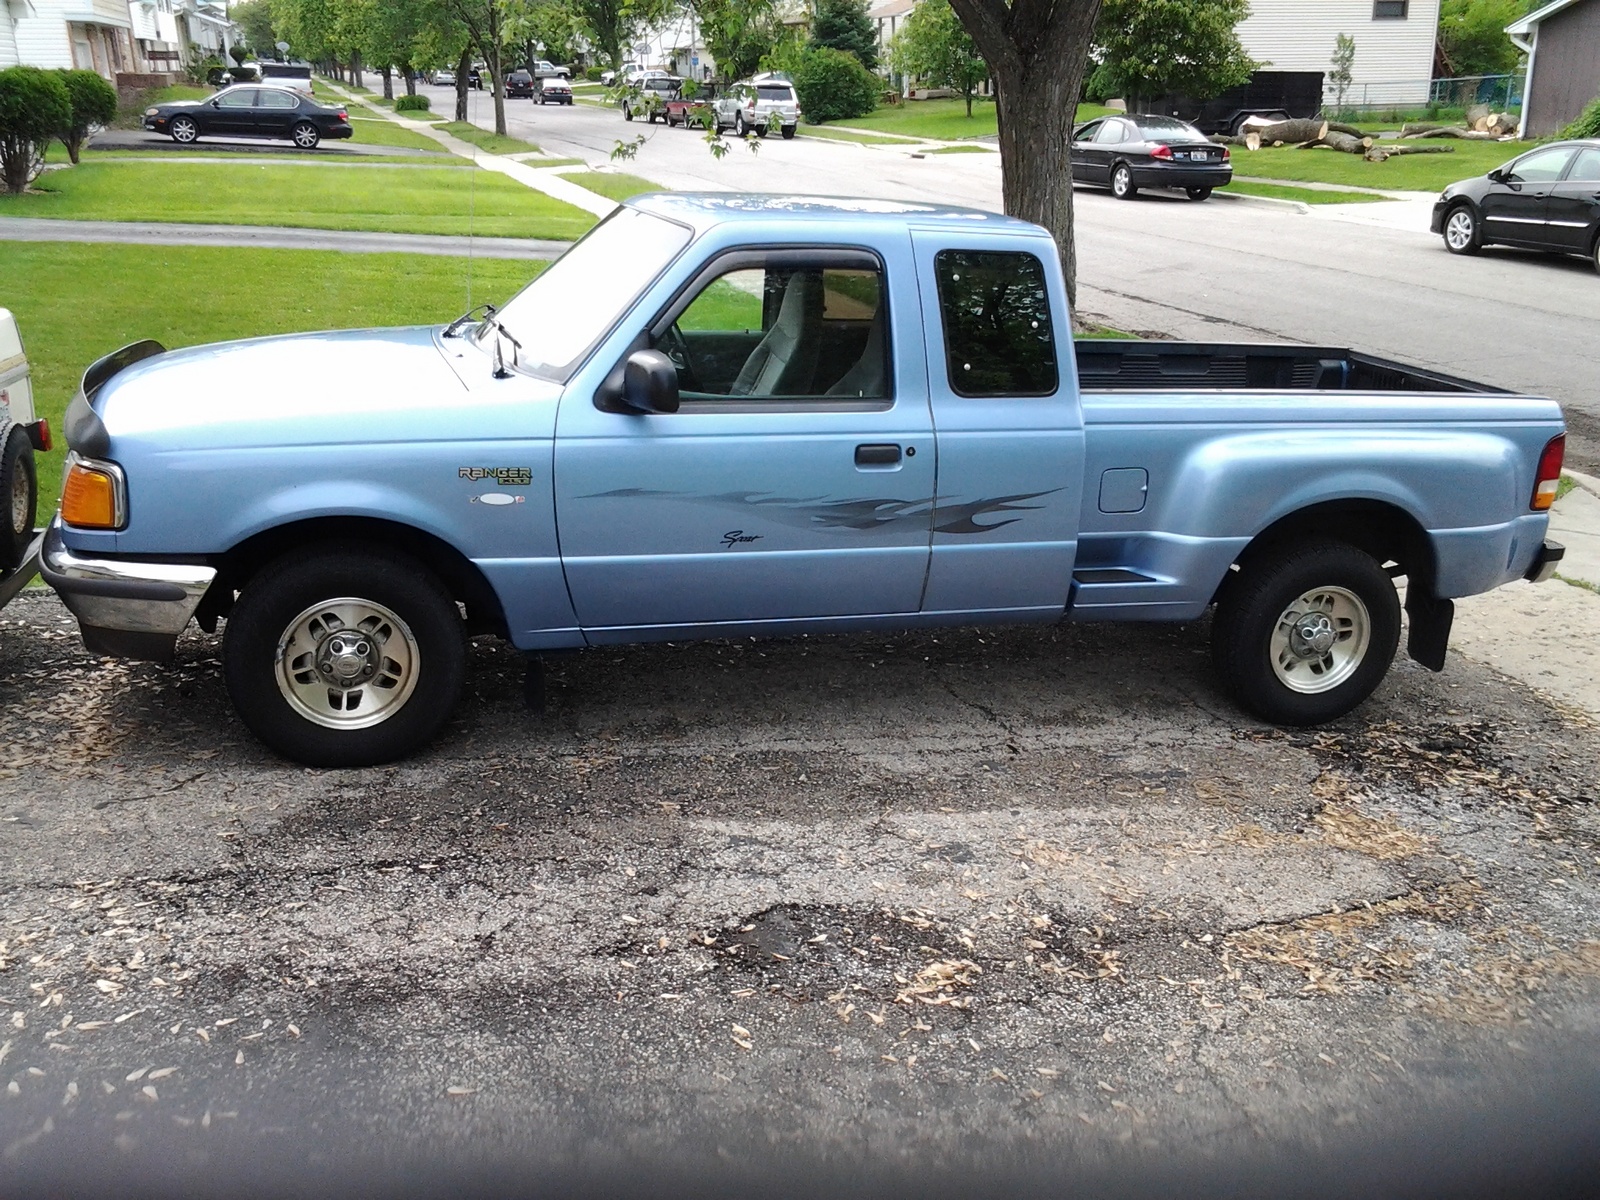 1997 Ford ranger extended cab review #9